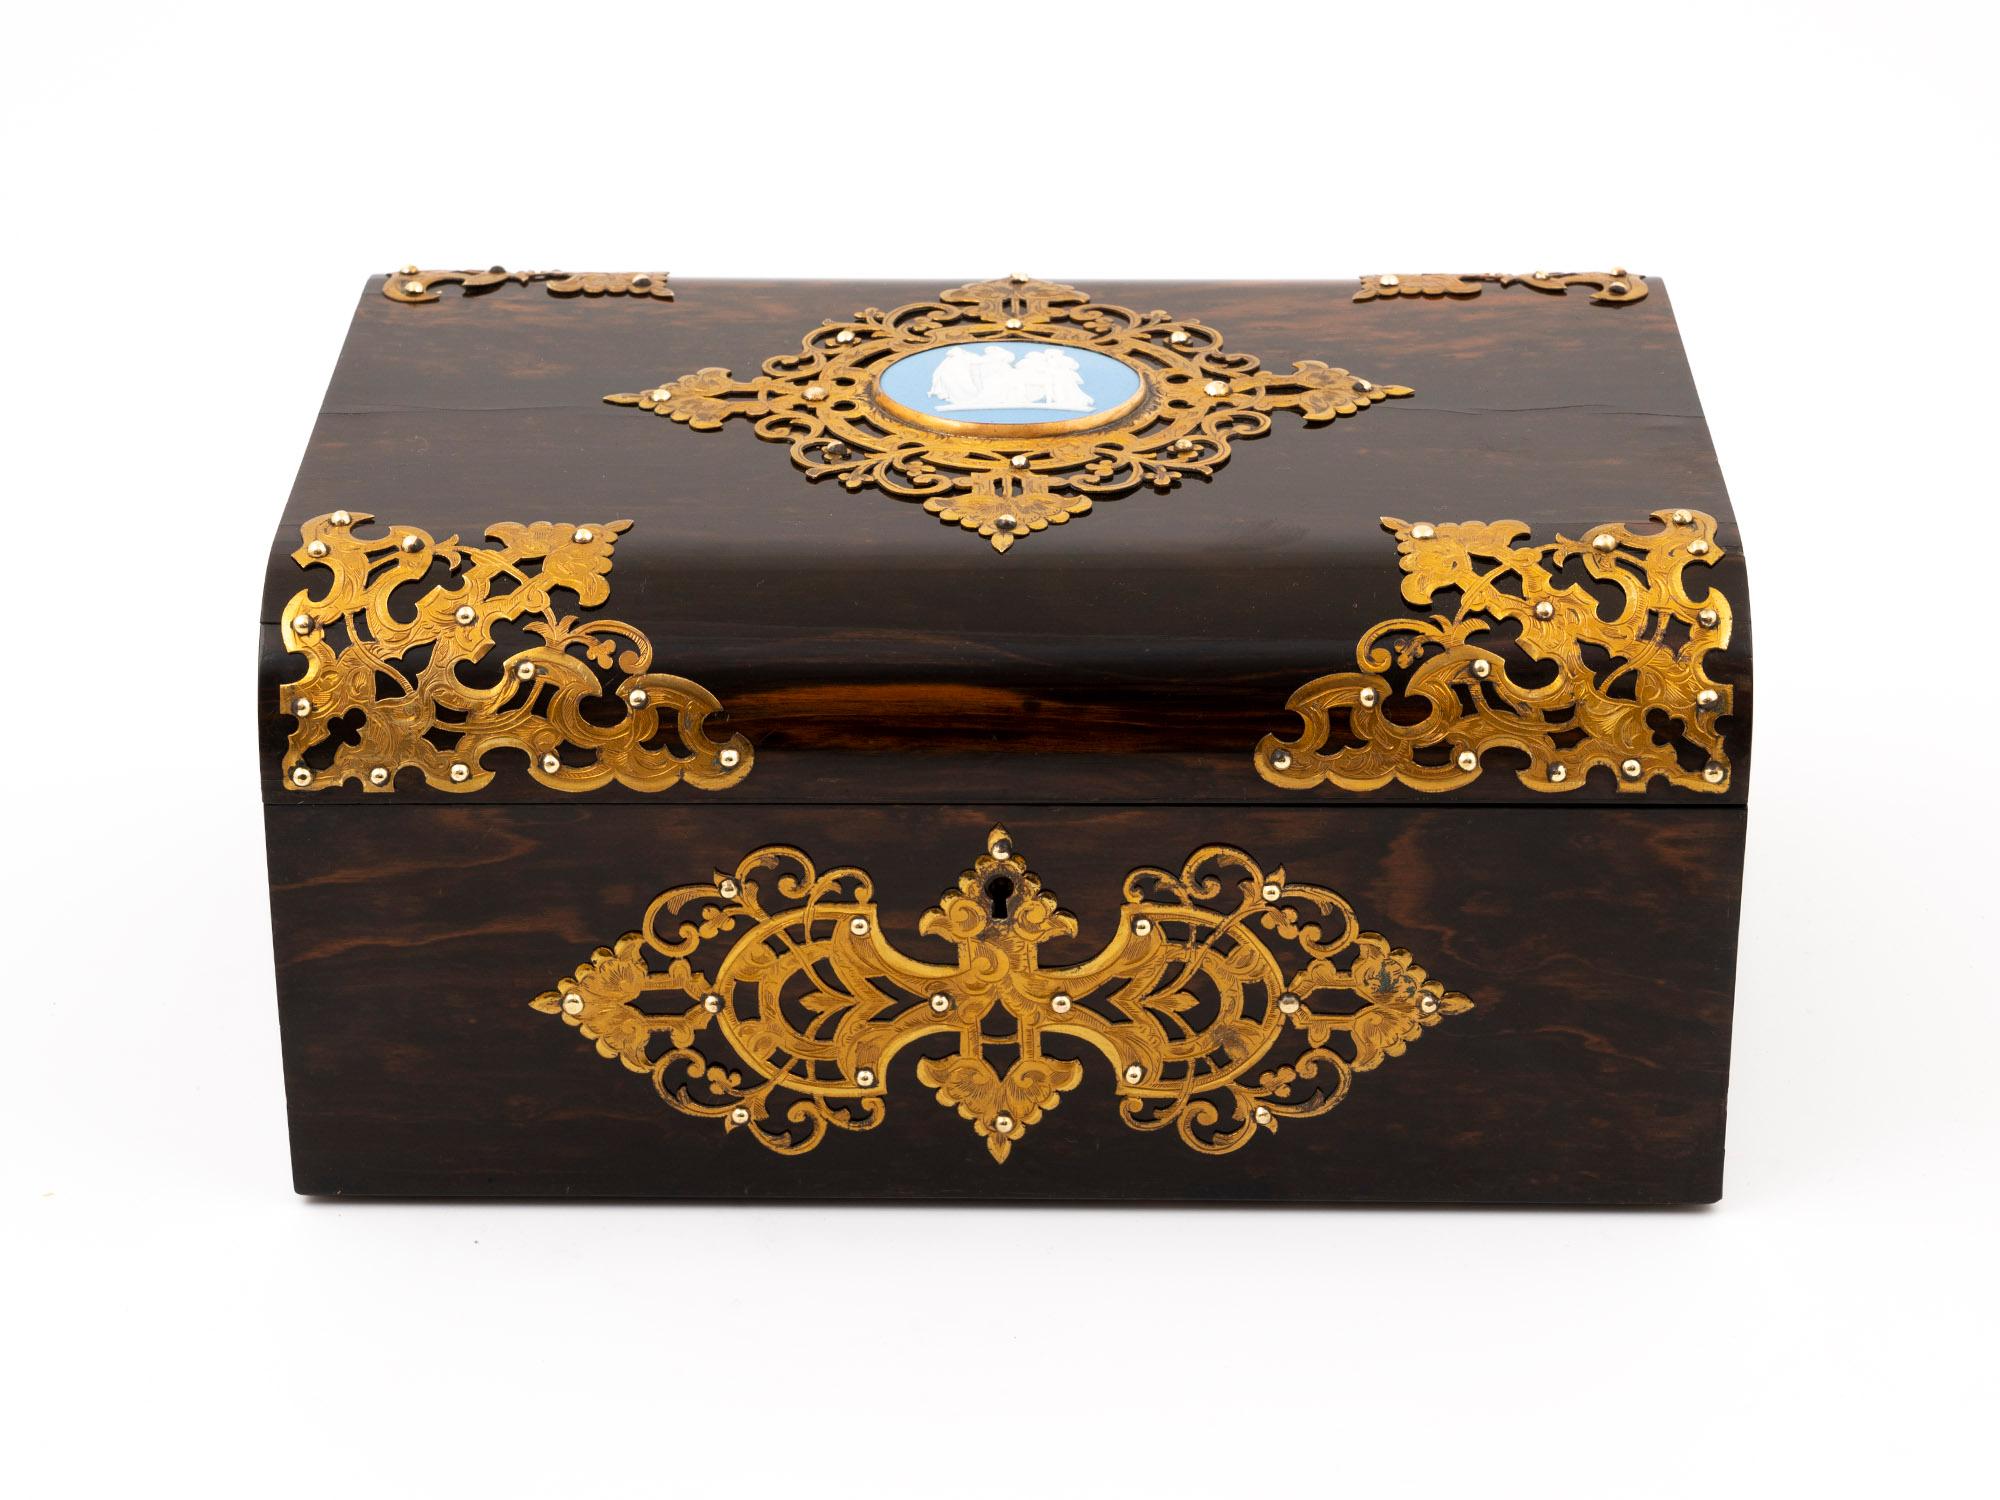 Behold the exquisite Coromandel dome-topped antique jewellery box, crafted by none other than Betjemann & Son, renowned for their unparalleled craftsmanship.

The box features stunning applied ornately engraved brass gilded mounts on the top and